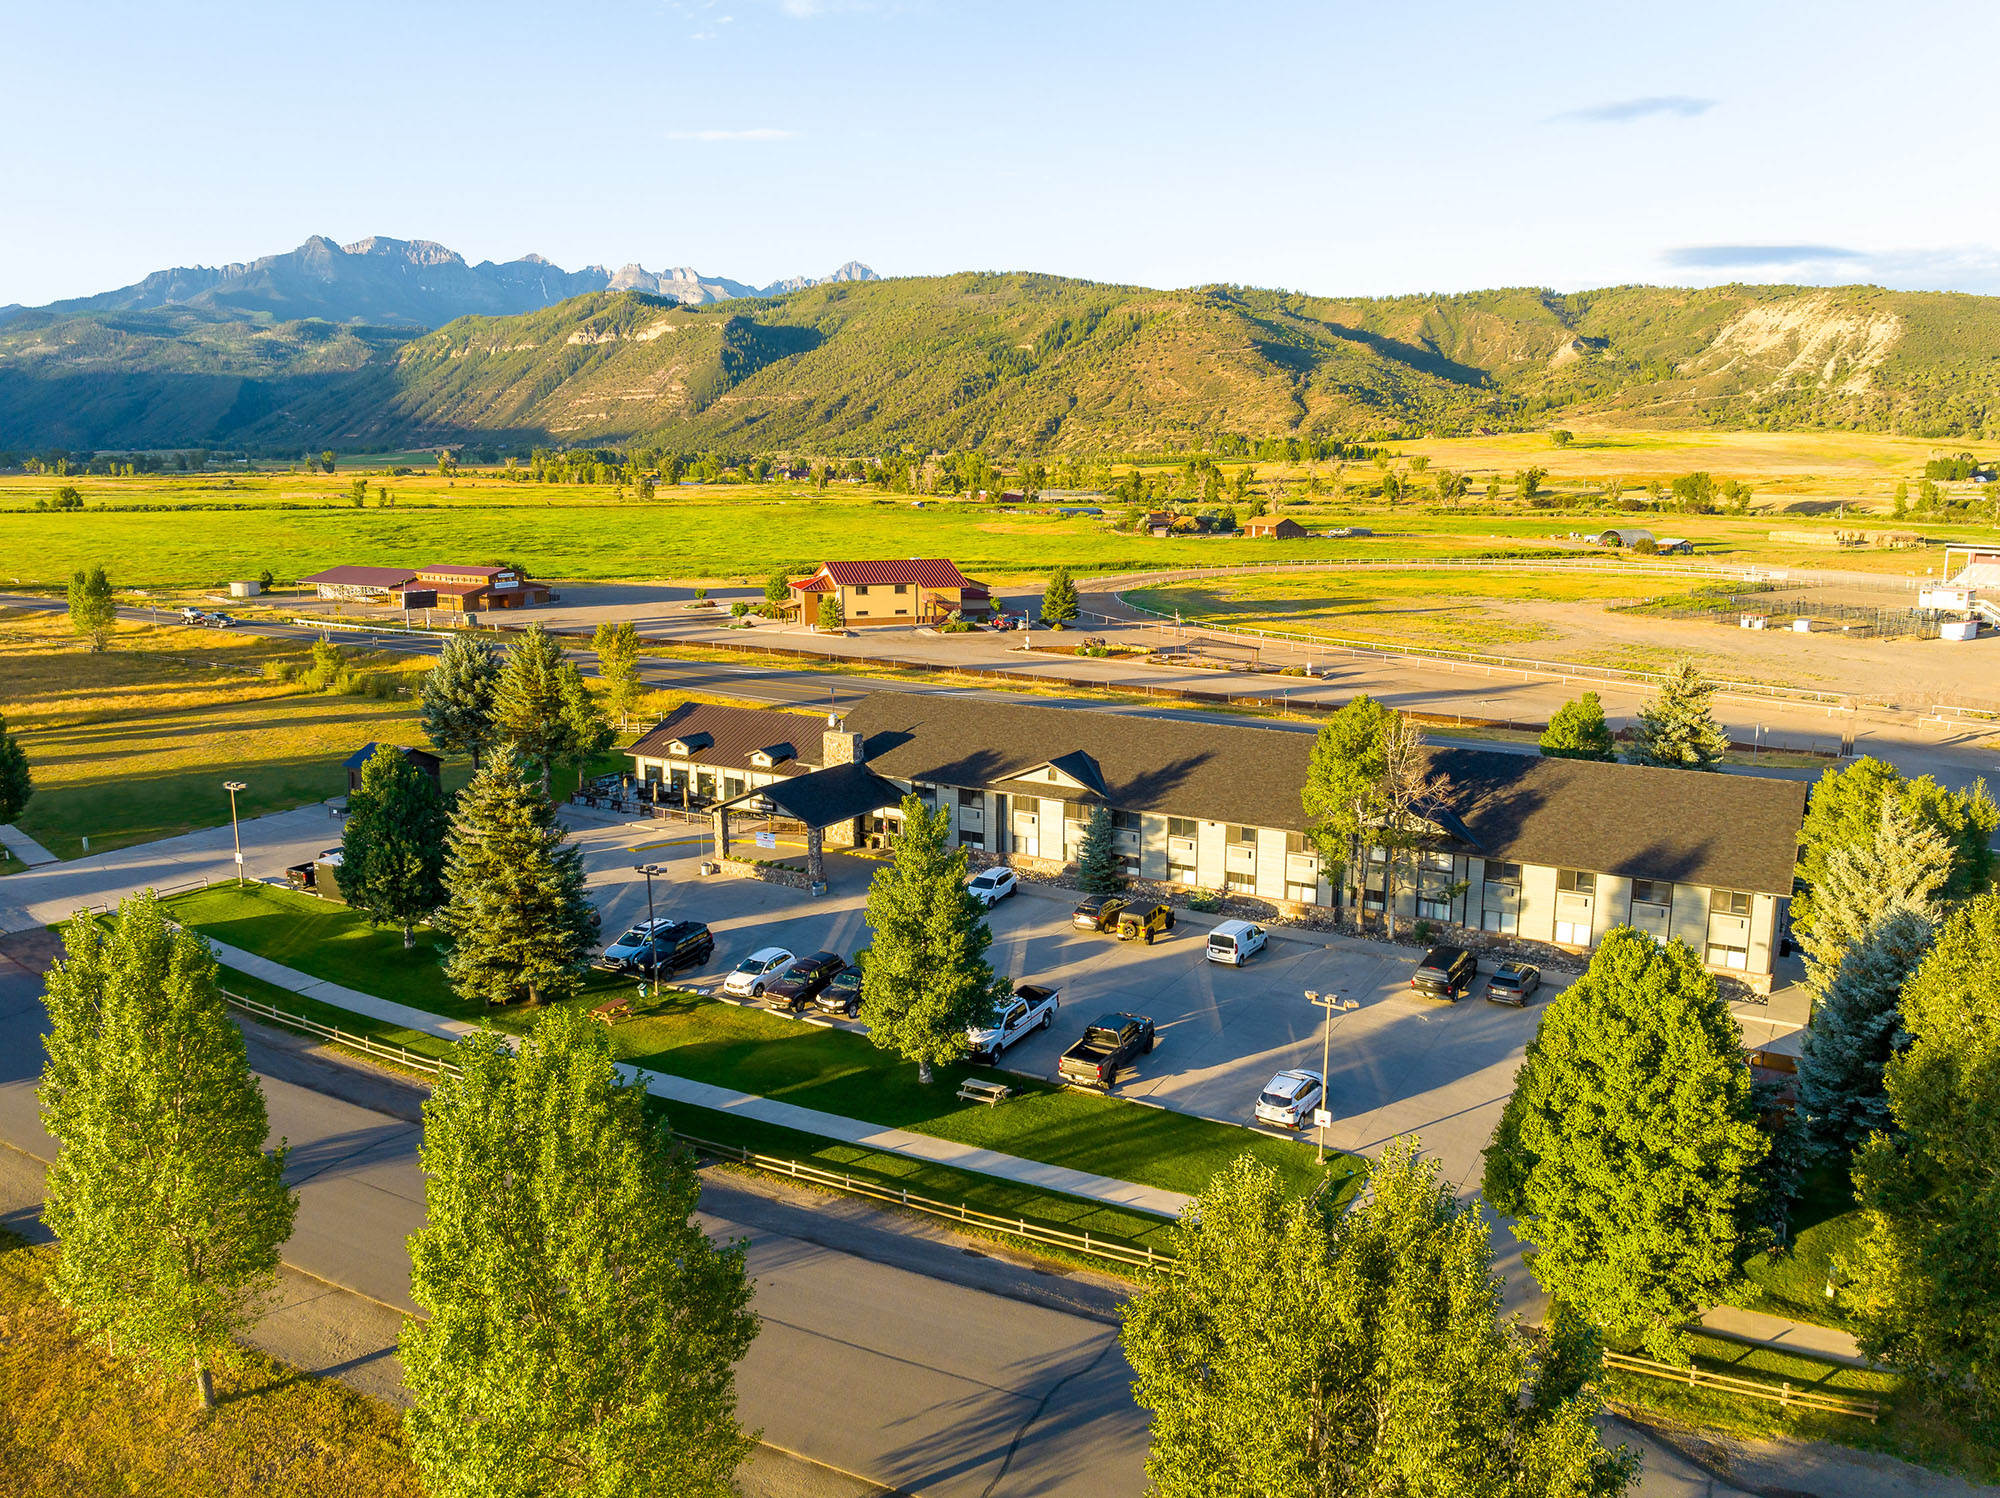 Aerial view of MTN Lodge Ridgway with Mountains